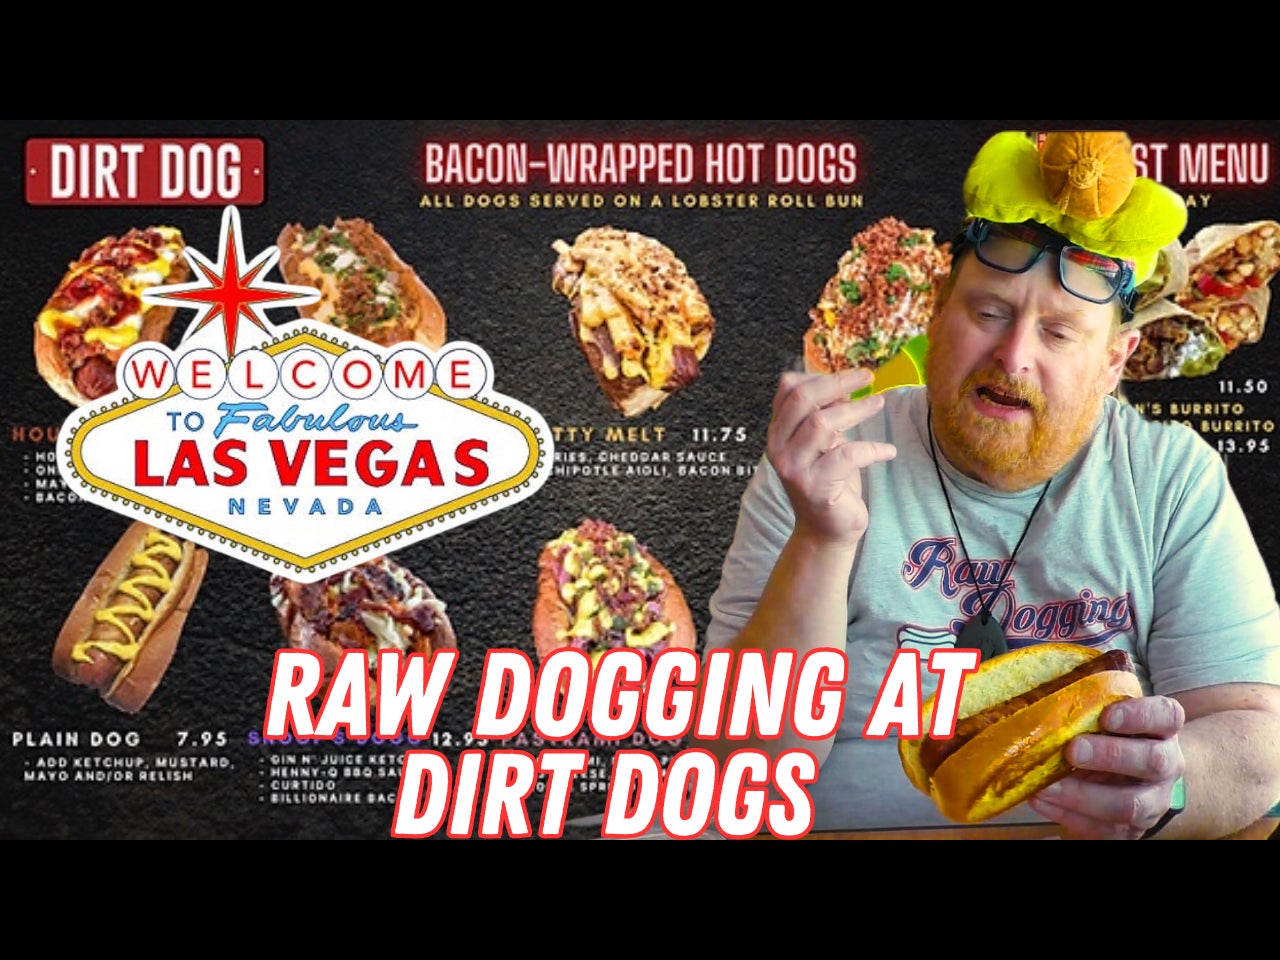 Raw Dogging at Dirt Dogs in Las Vegas